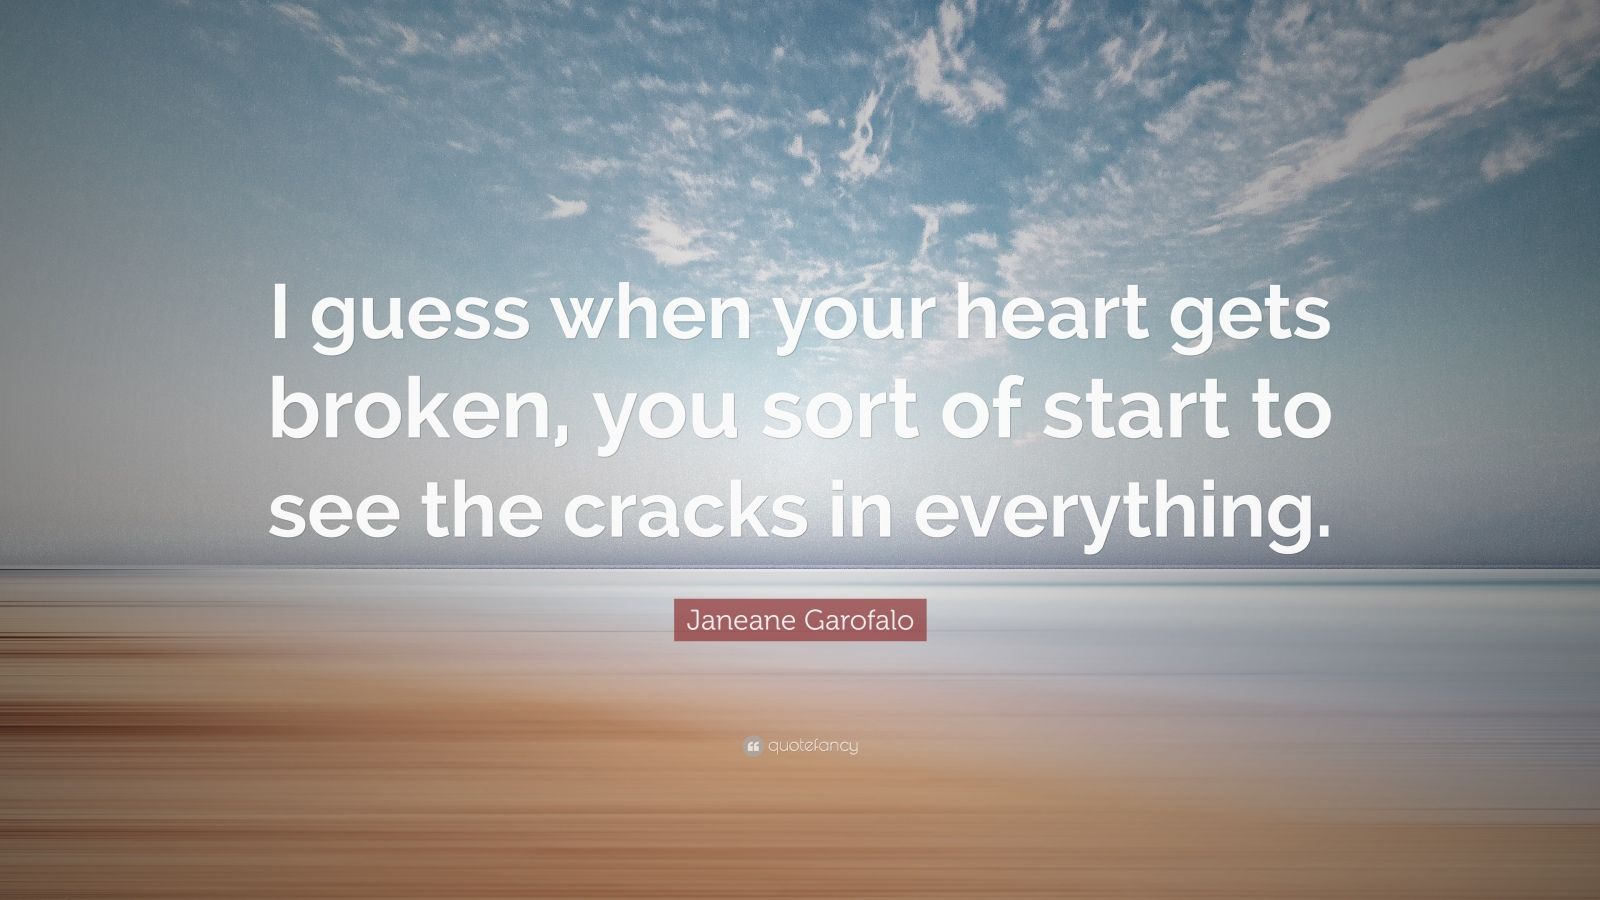 Janeane Garofalo Quote: “I guess when your heart gets broken, you sort ...